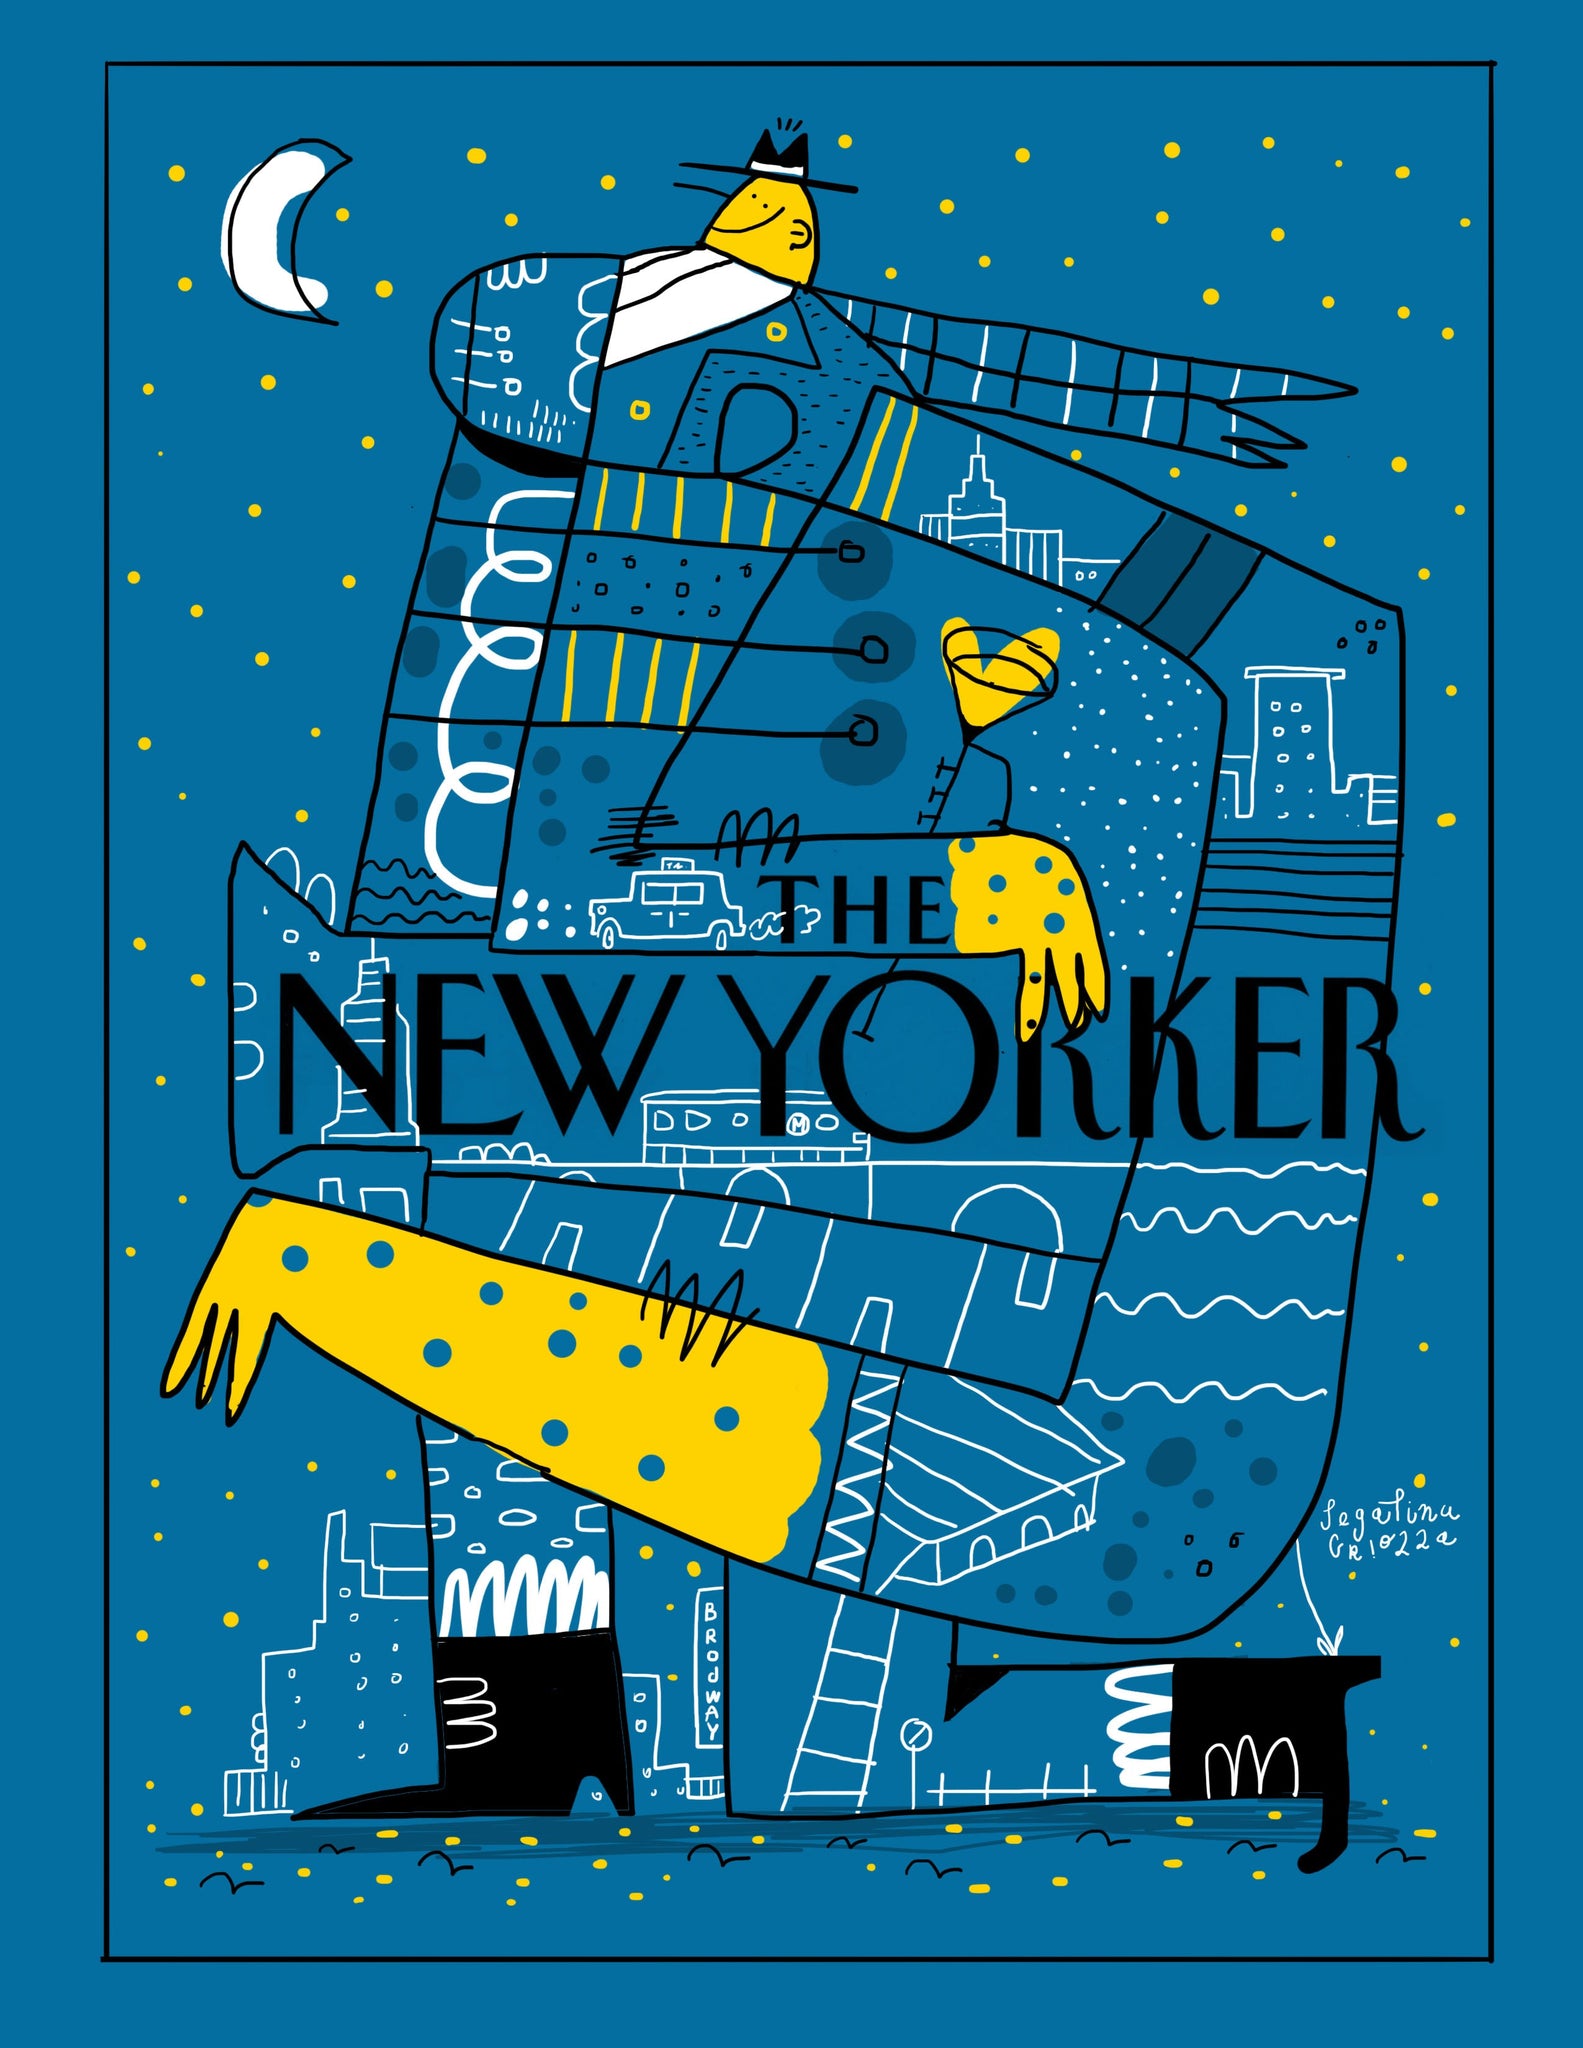 New Yorker Post (Limmited Edition)